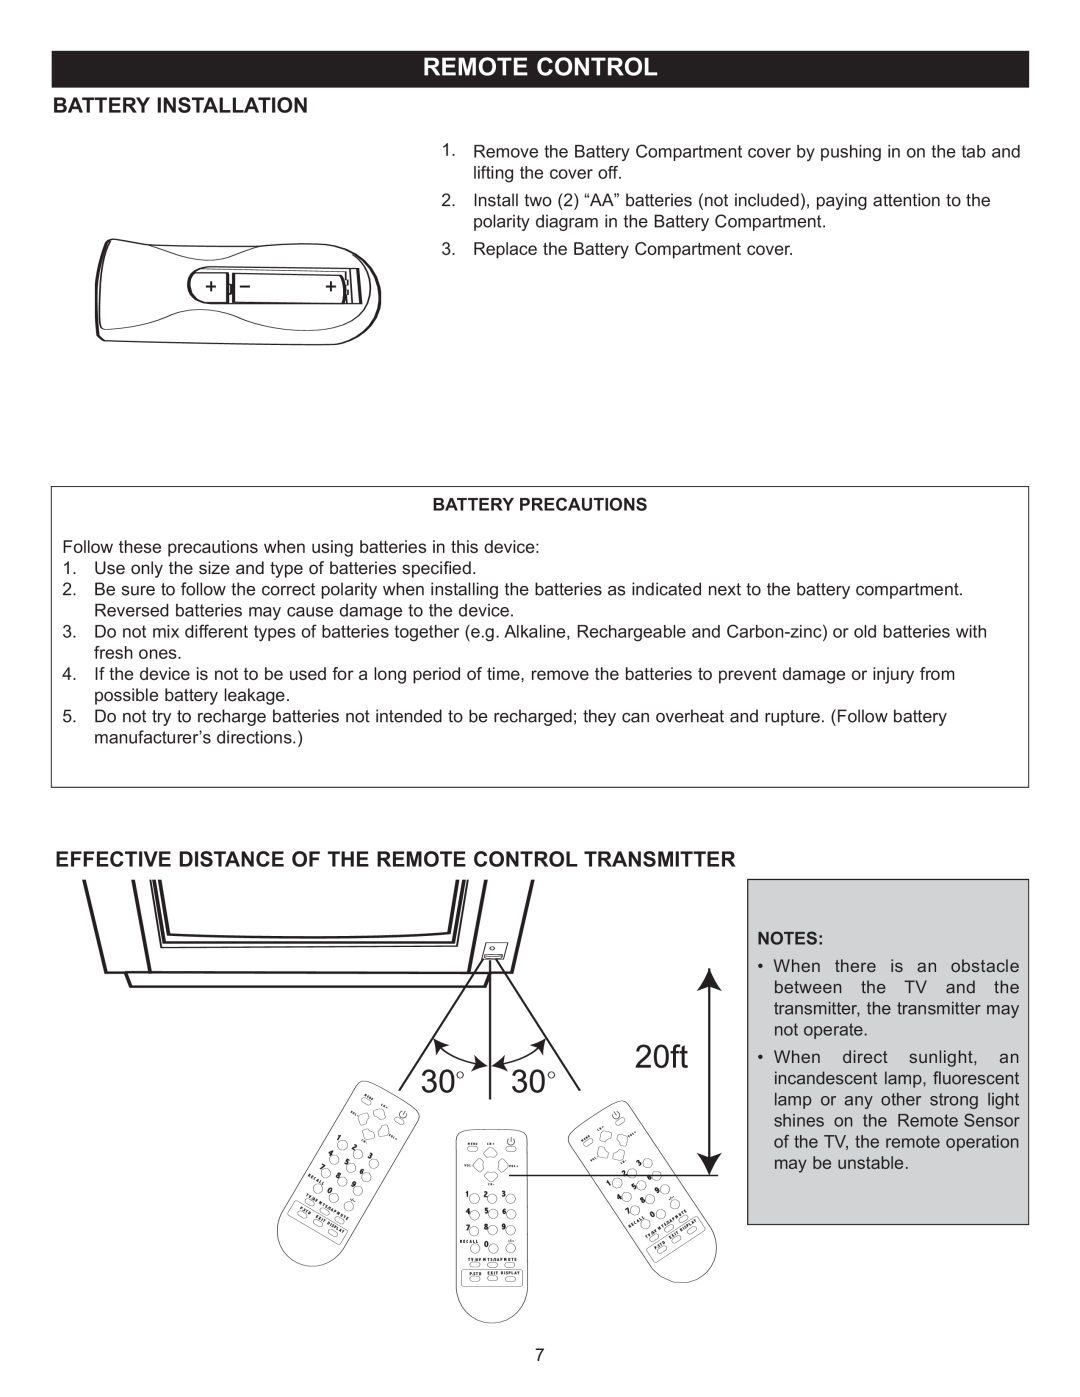 Memorex MT2024 manual Battery Installation, Effective Distance Of The Remote Control Transmitter, Battery Precautions 